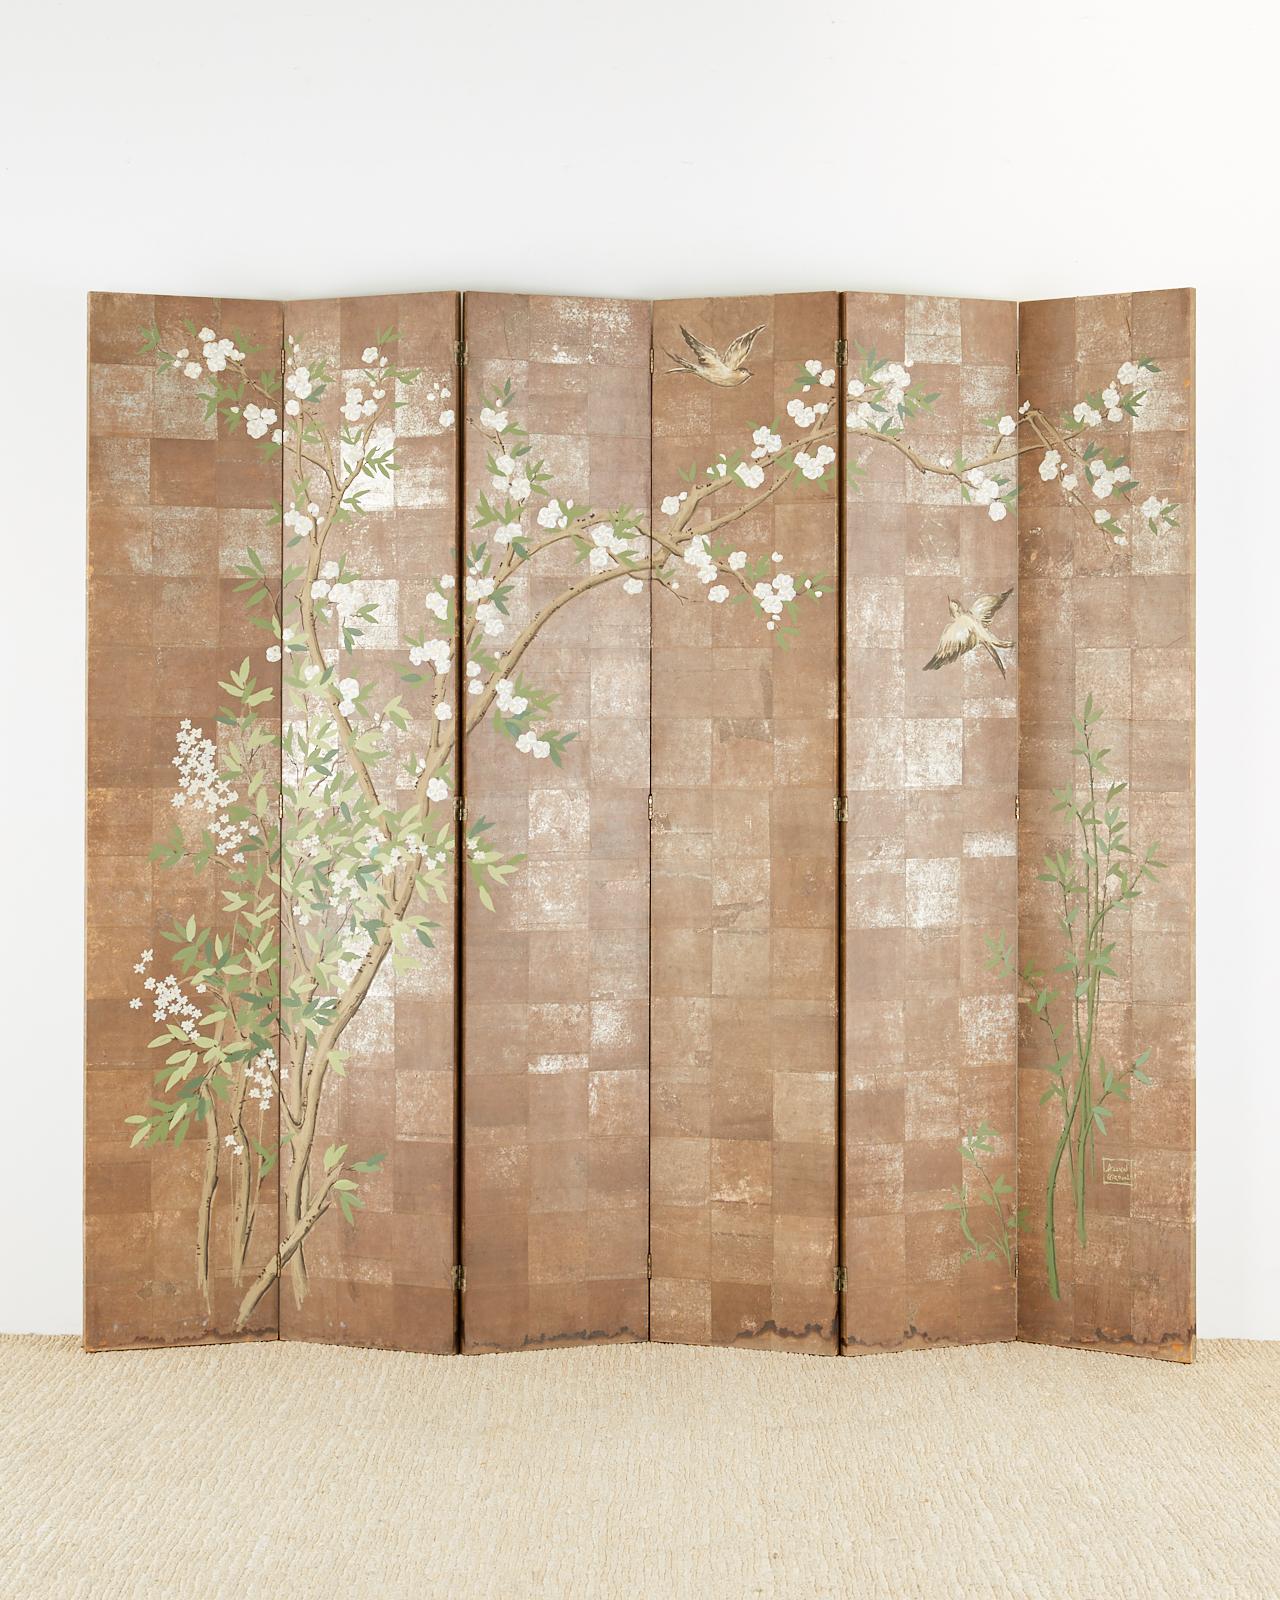 Hand-Crafted Chinoiserie Six-Panel Screen Inspired by Robert Crowder